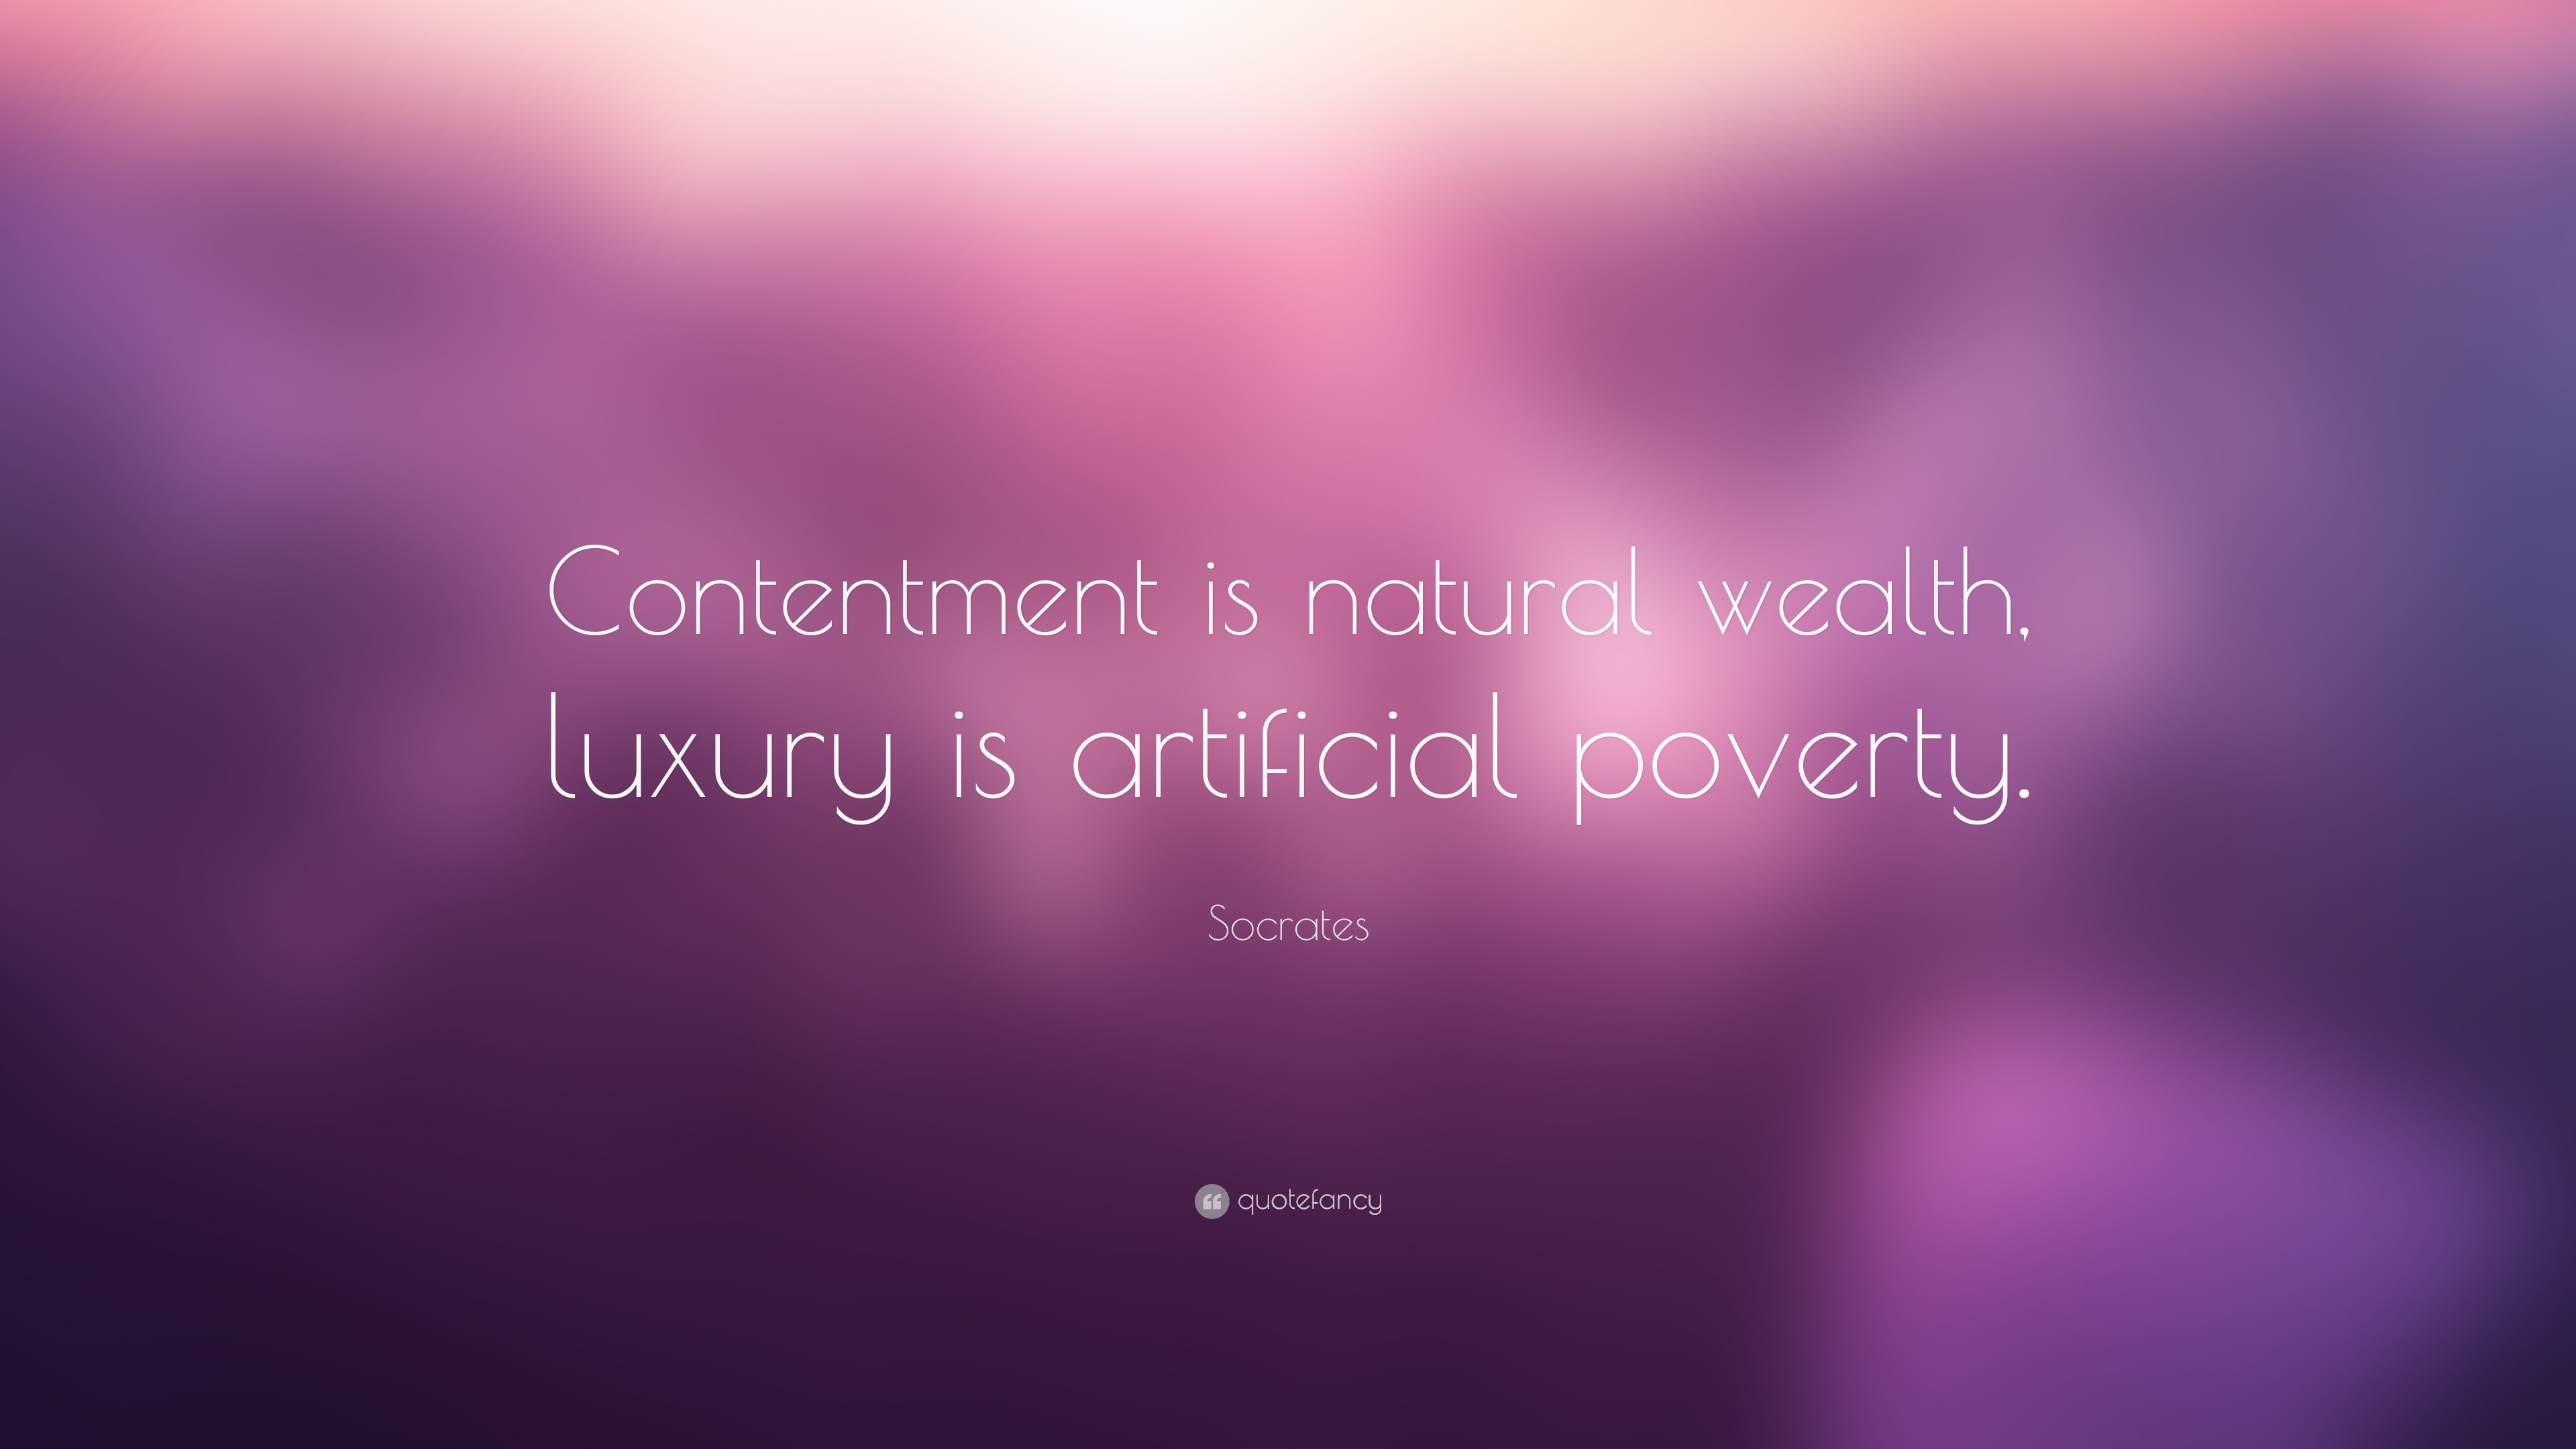 Socrates Quote: "Contentment is natural wealth, luxury is artificial poverty."